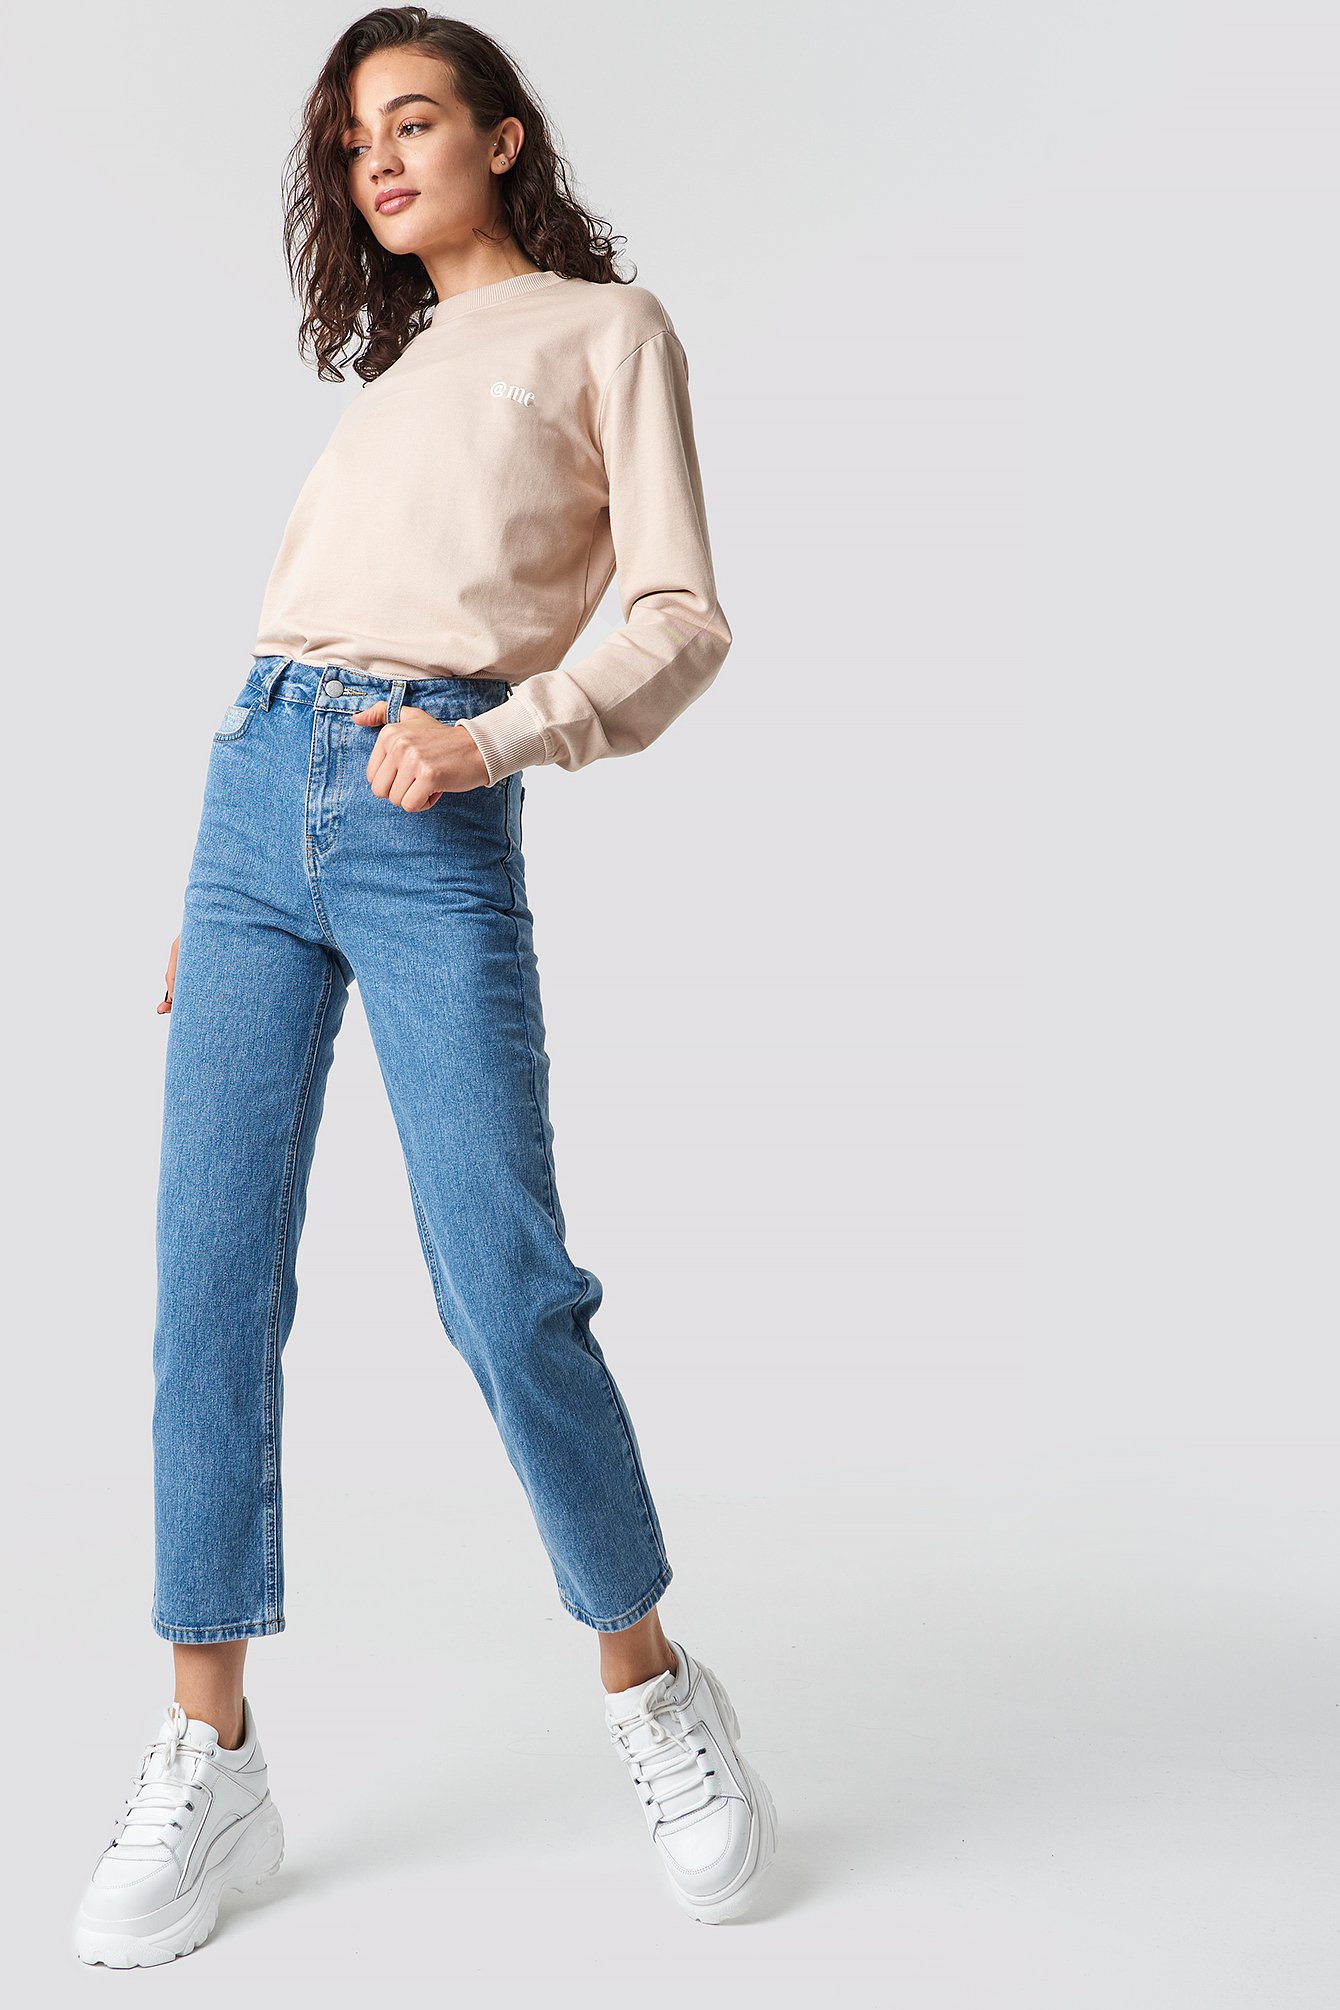 straight jeans outfit